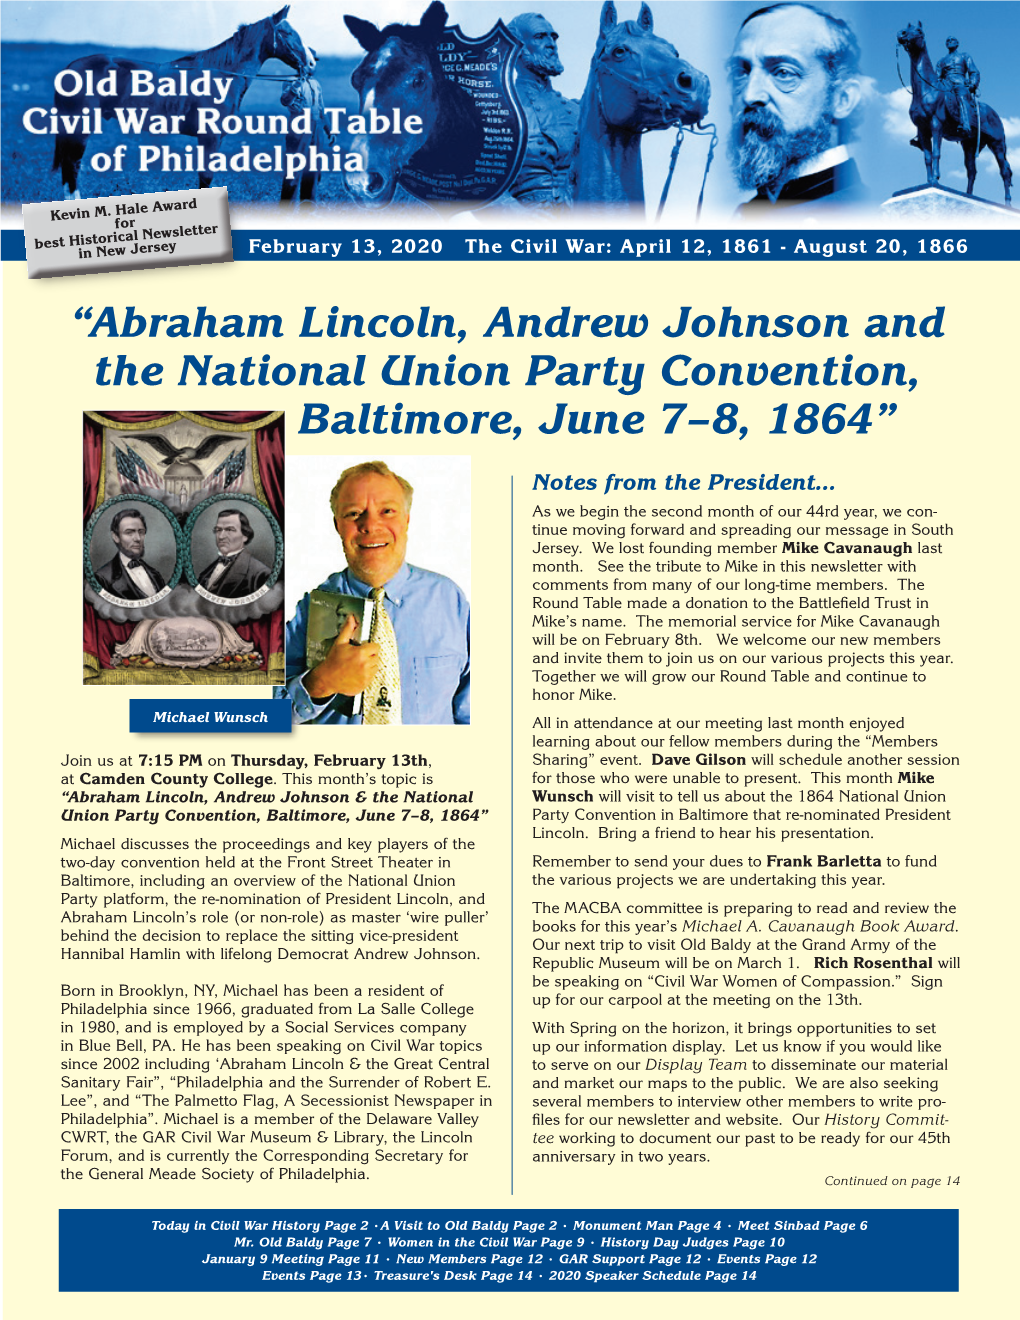 “Abraham Lincoln, Andrew Johnson and the National Union Party Convention, Baltimore, June 7–8, 1864”